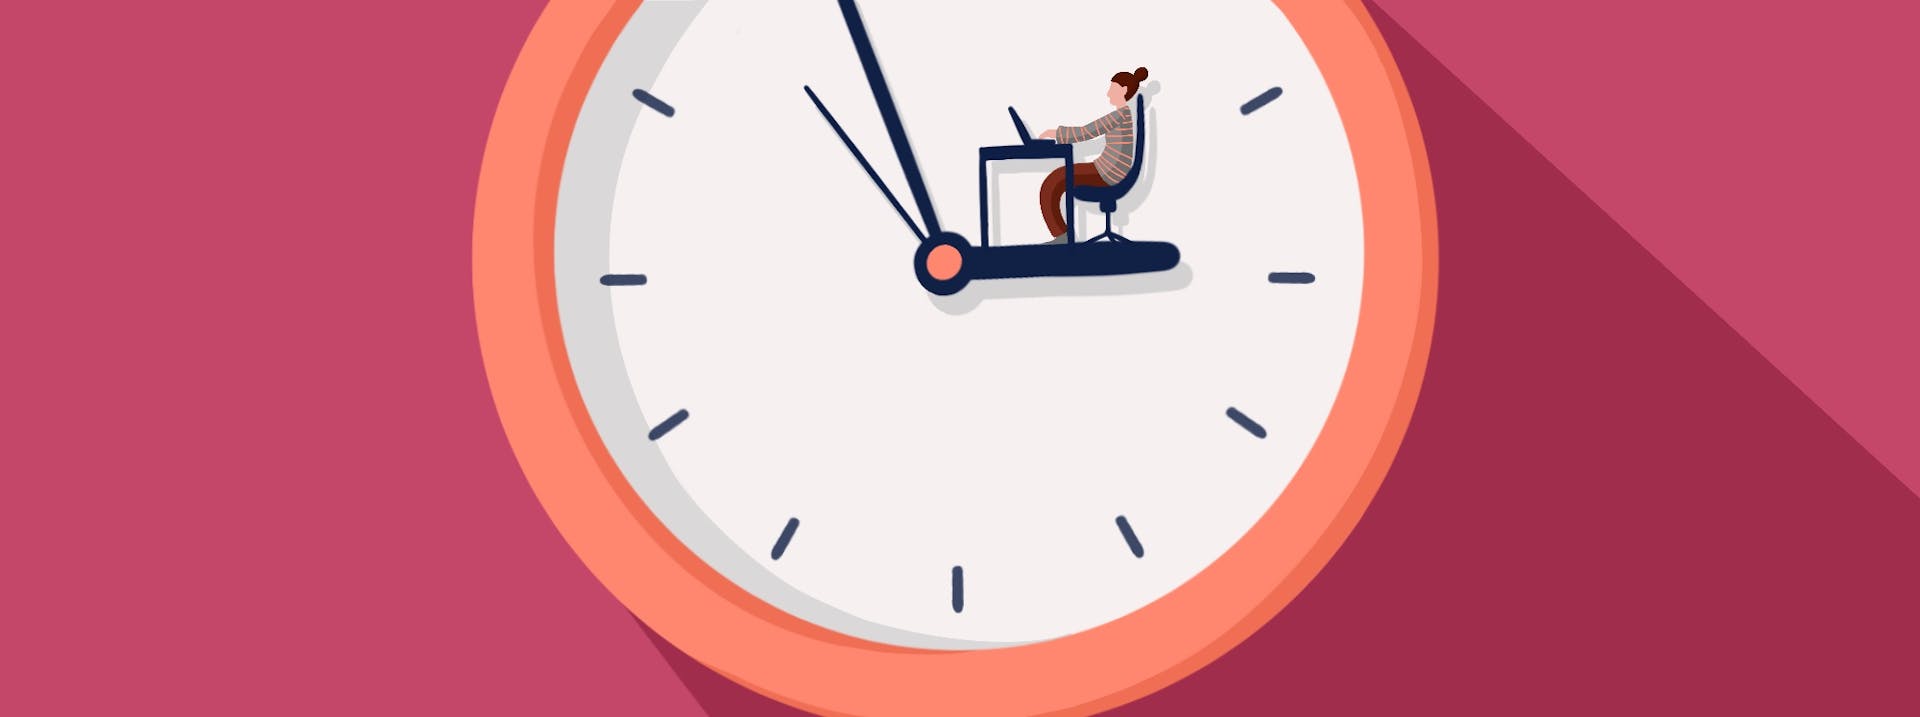 Abstract illustration of a clock showing 3 o'clock with a woman sitting on the hour hand working at a desk 